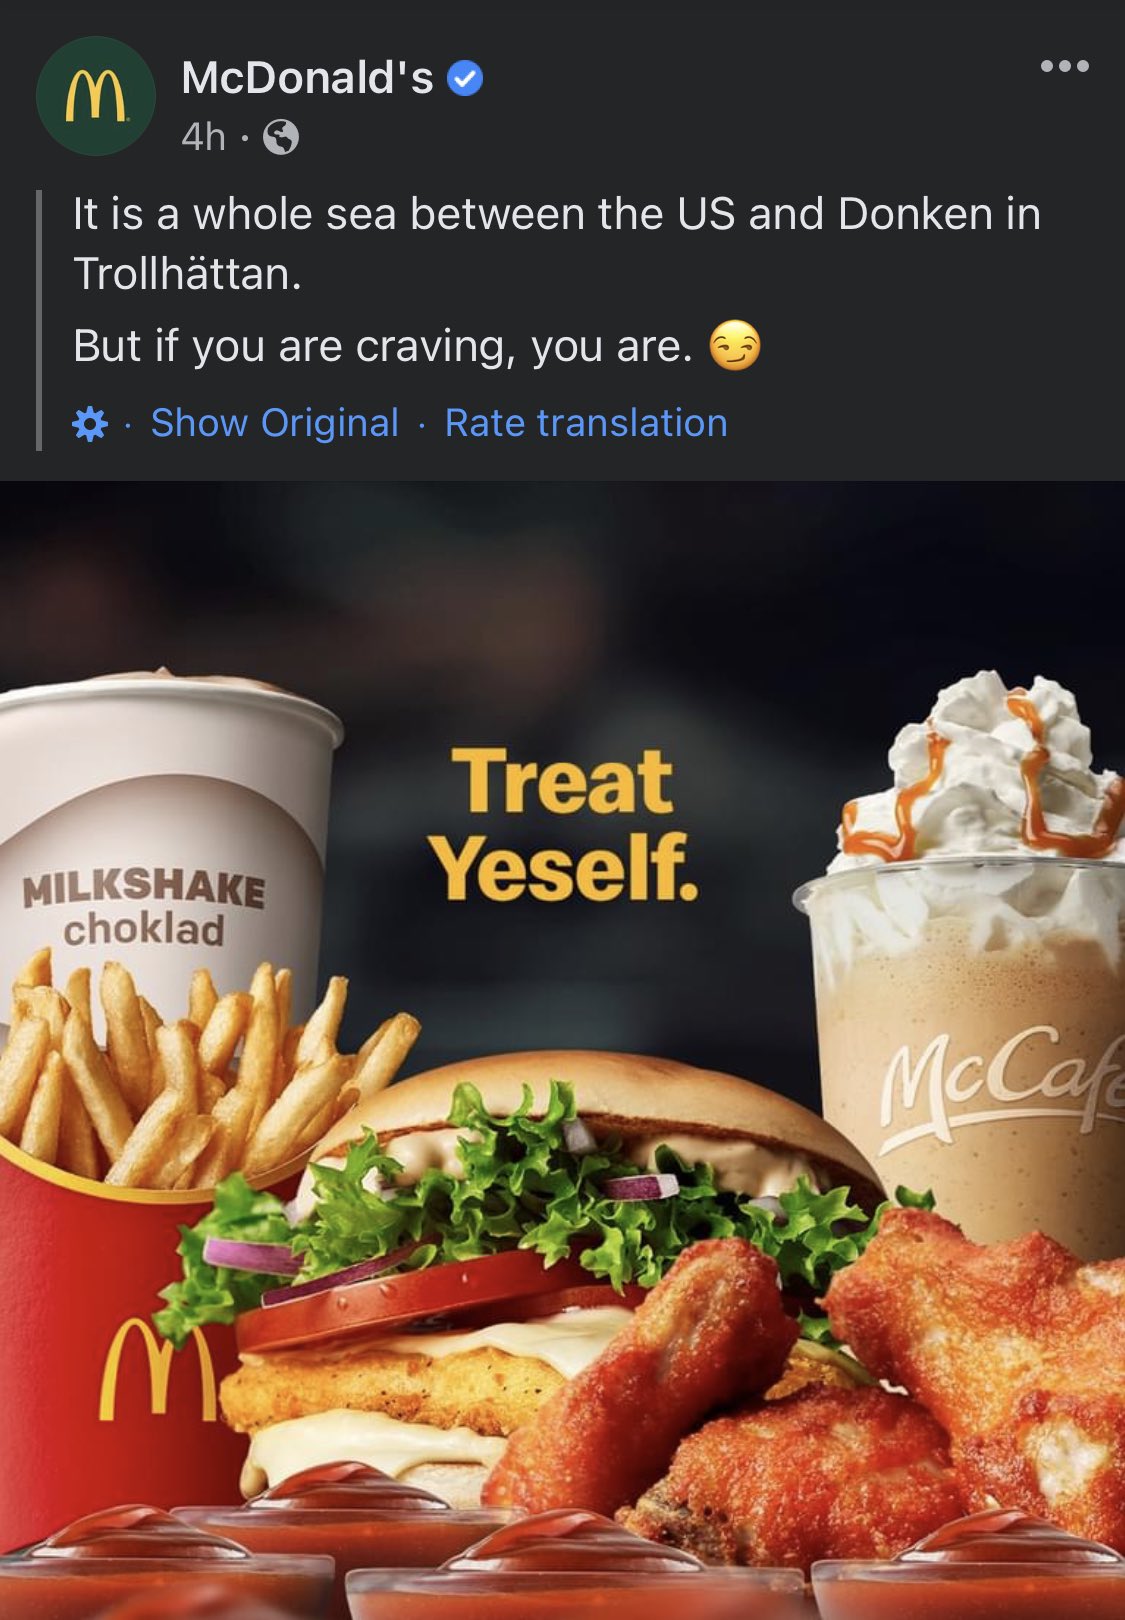 Photos Of Ye on Twitter: "The McDonalds in Sweden has now made an  advertising campaign based on Ye's recent order and they're using the  slogan "Treat Yeself" 🍟😂… https://t.co/oUPhwWFzgf"